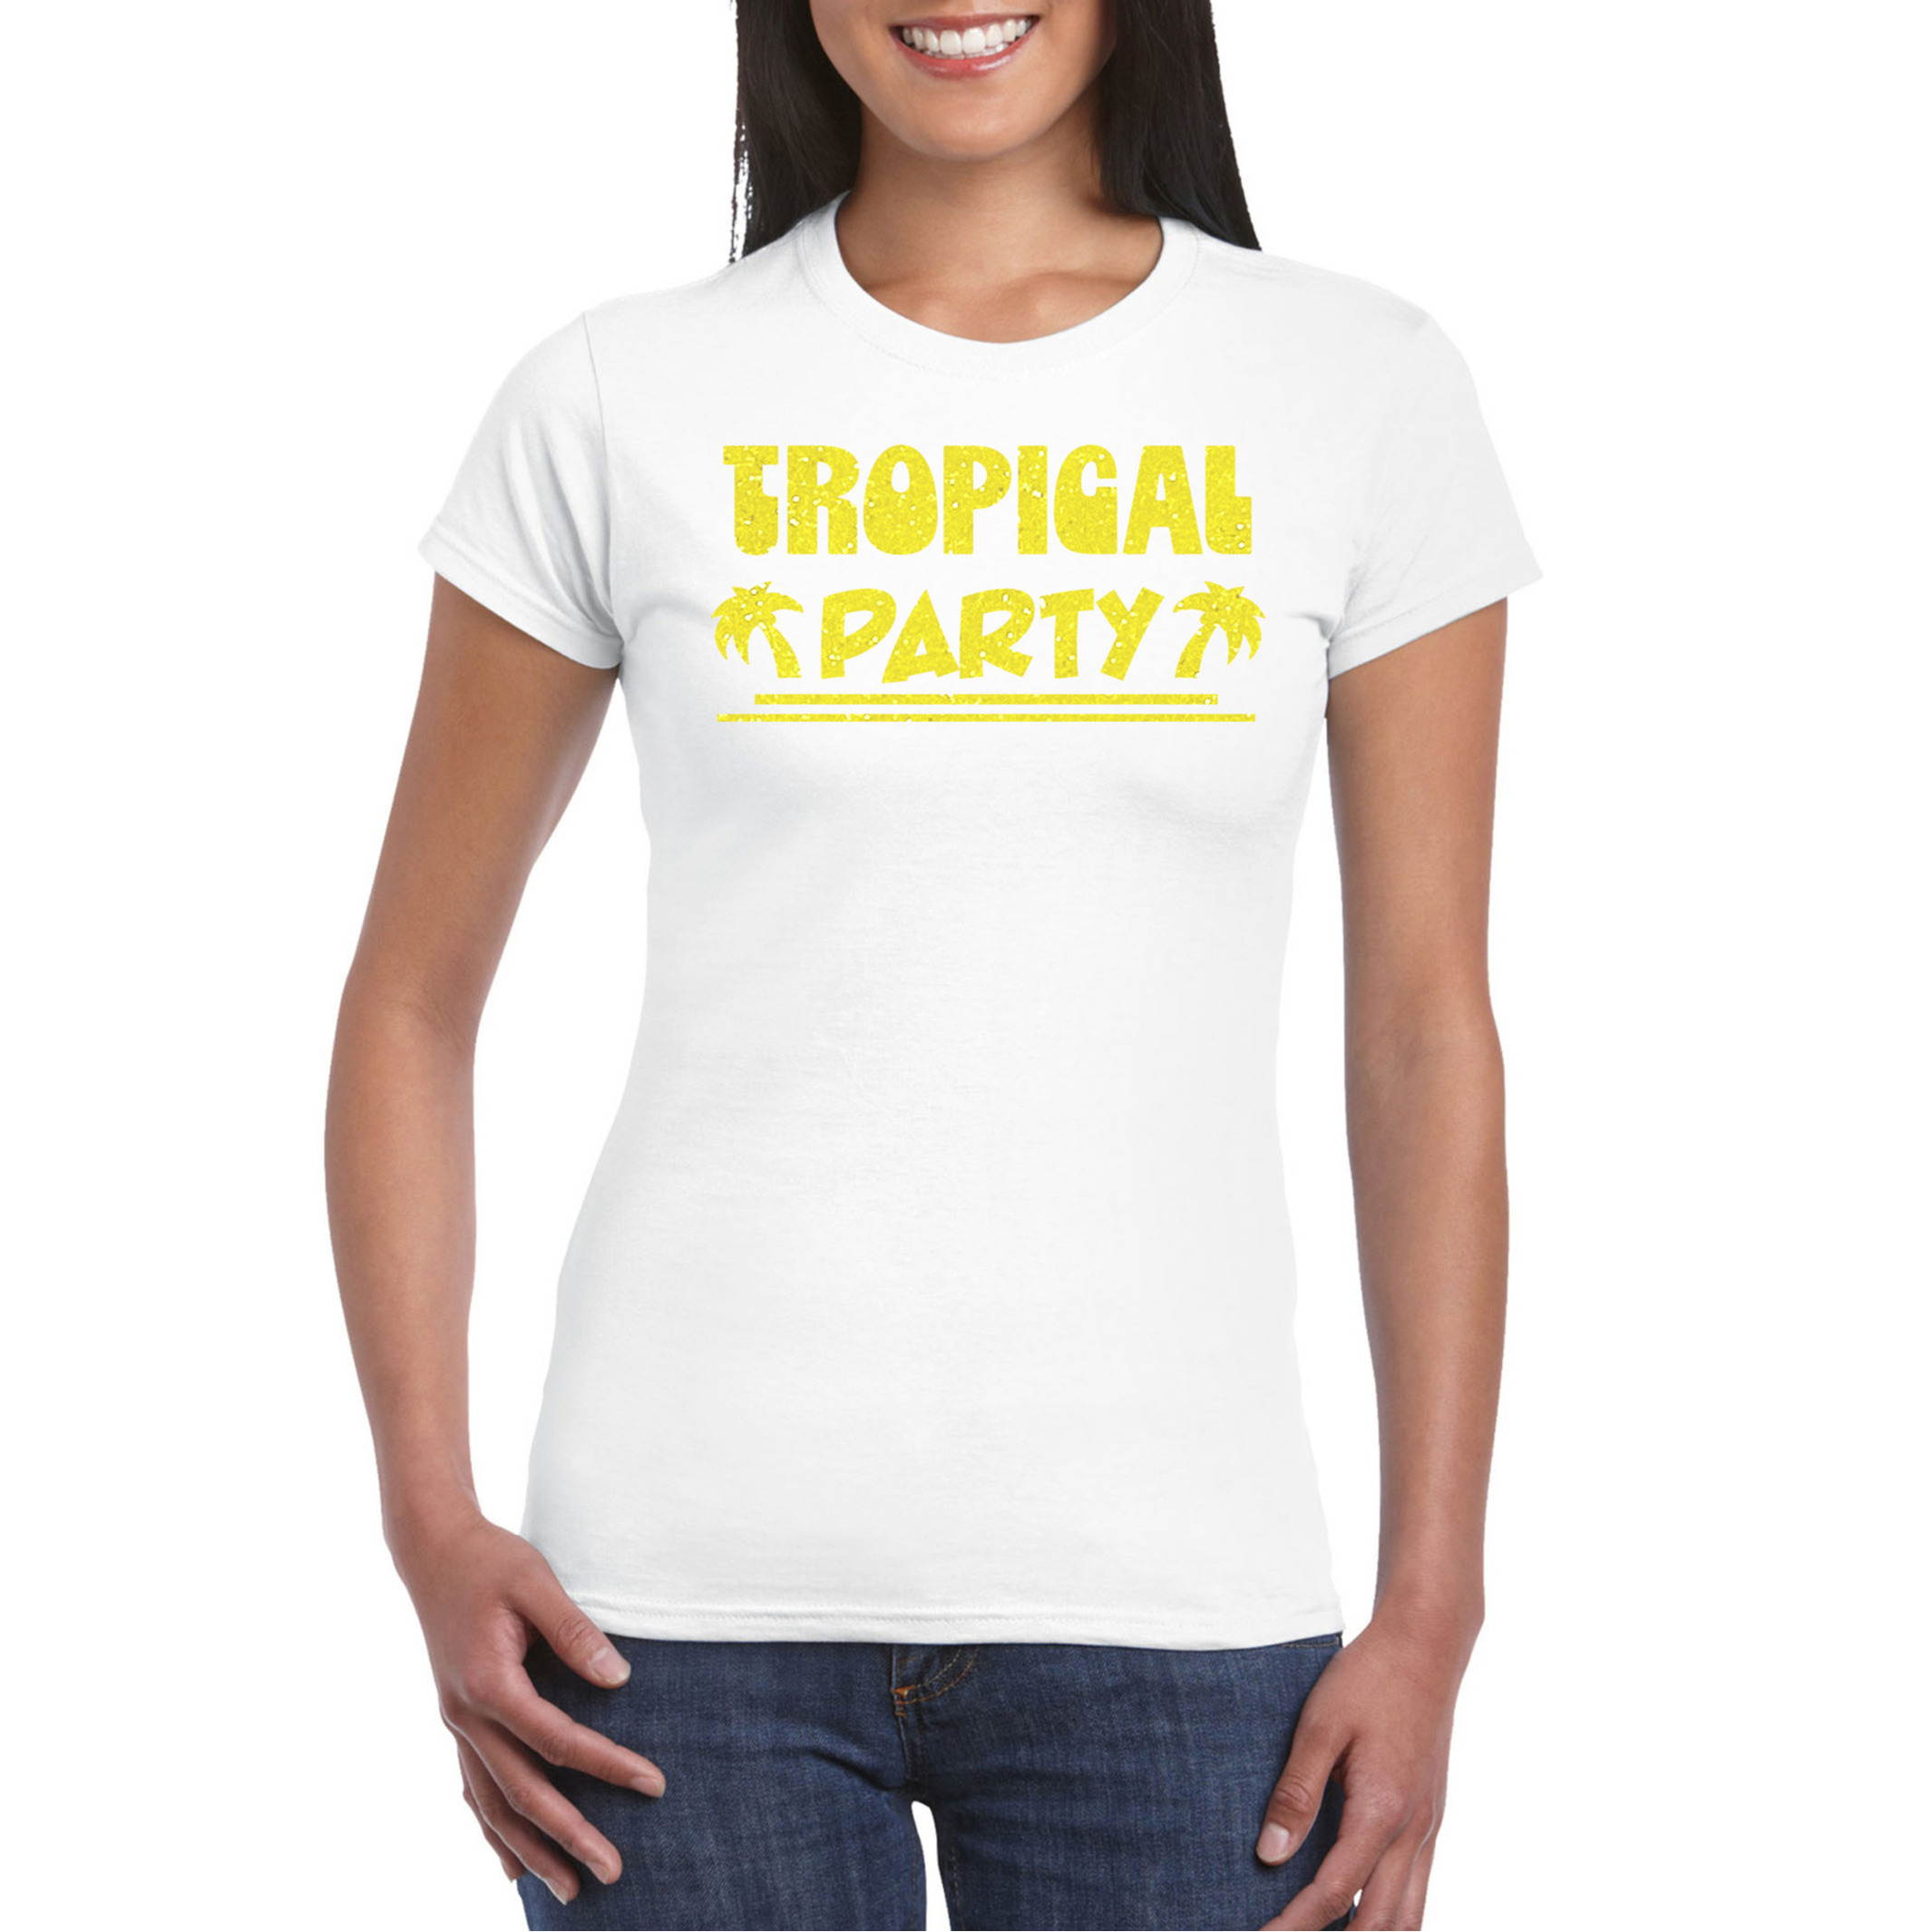 Toppers Tropical party T-shirt voor dames met glitters wit-geel carnaval-themafeest